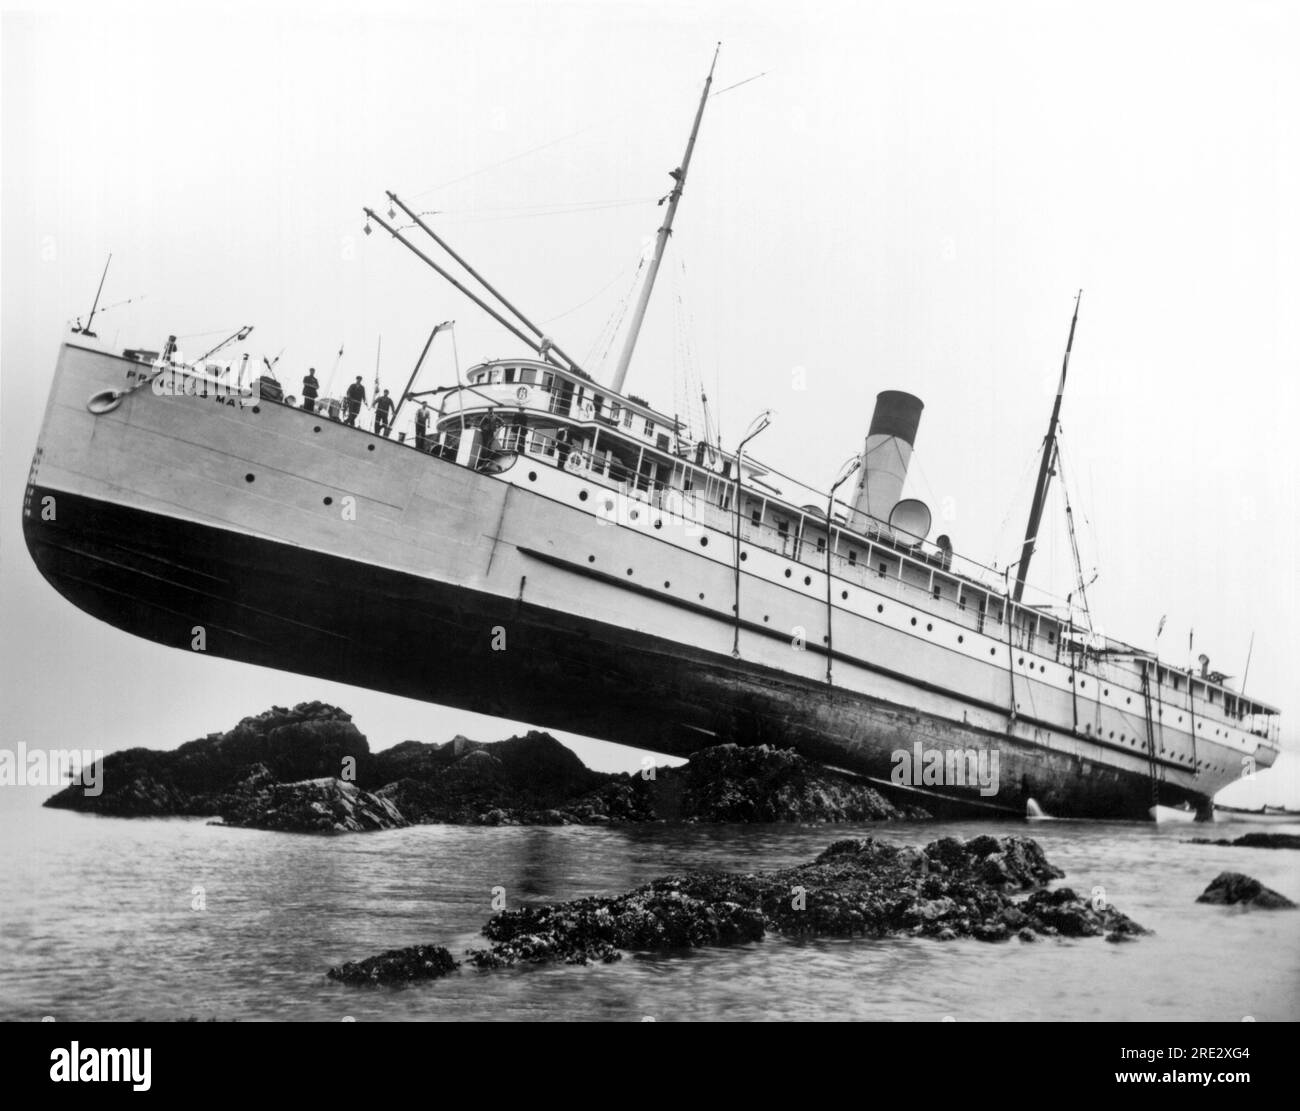 Sentinel Island, Alaska:  August 8, 1910. Canadian Pacific Raiway coastal liner, the S.S. Princess May after she ran aground at high tide in 1910 off Sentinel Island in Alaska. She was carrying 148 crew and passengers plus a shipment of gold and mail. All were rescued, and the ship was salvaged. Stock Photo